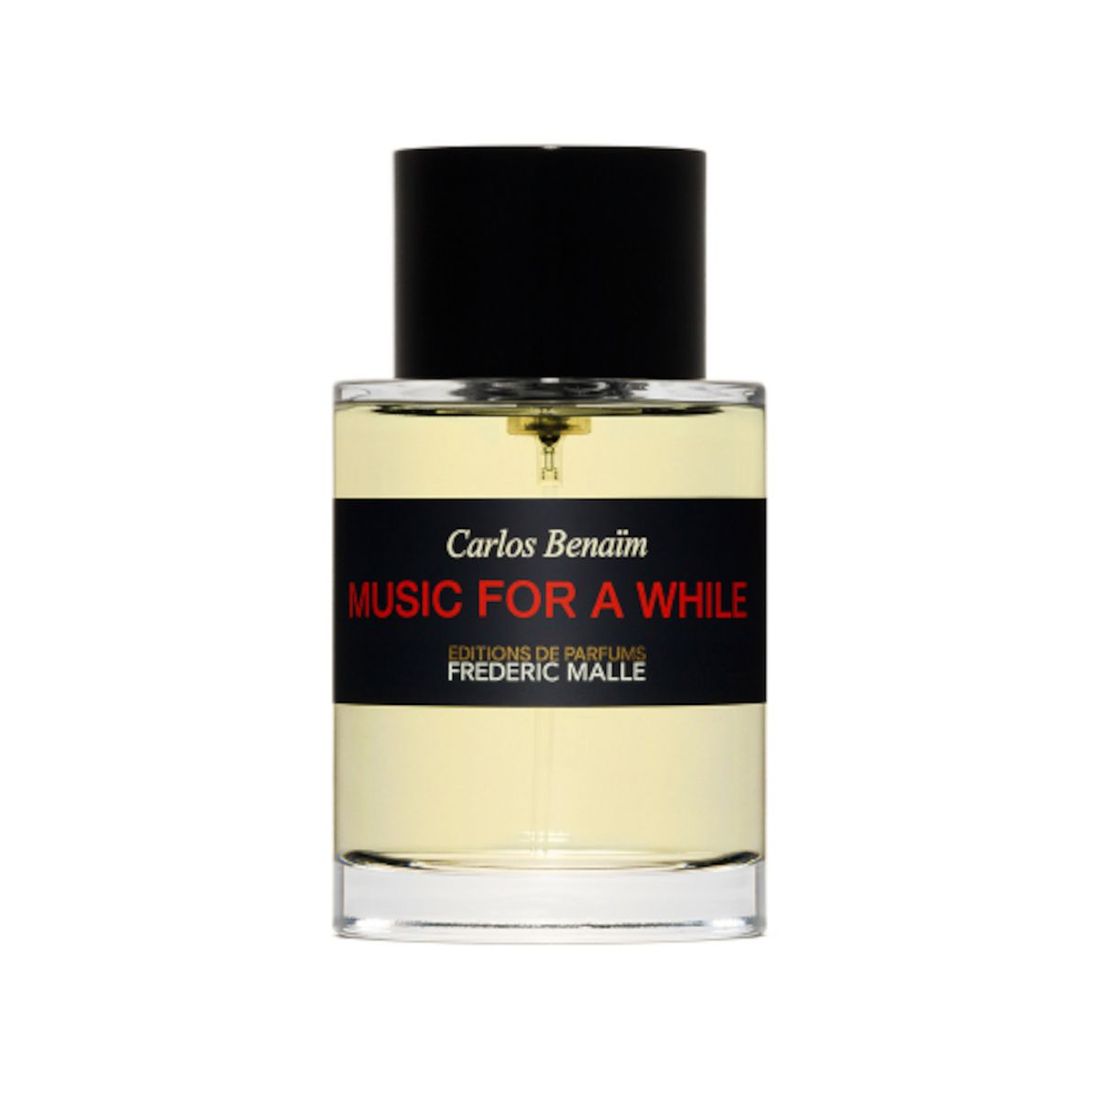 editions de parfums frederic malle music for a while